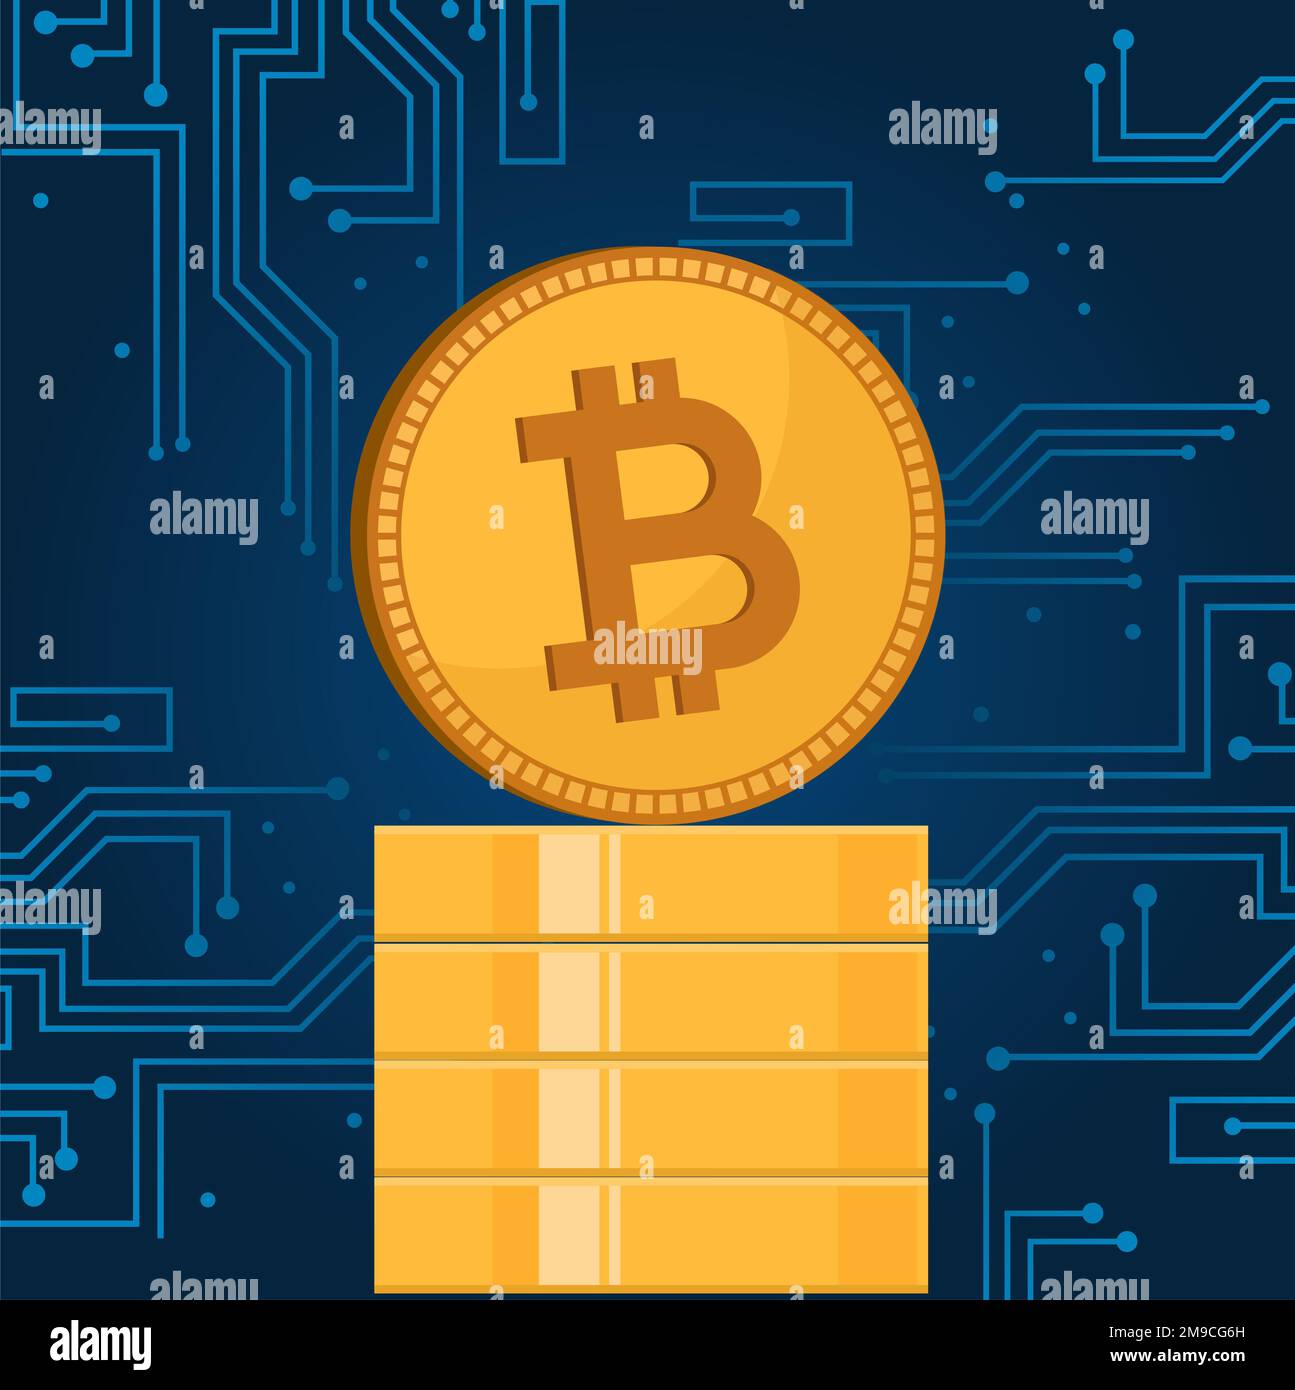 illustration of a bitcoin coin whit cyber background Stock Photo